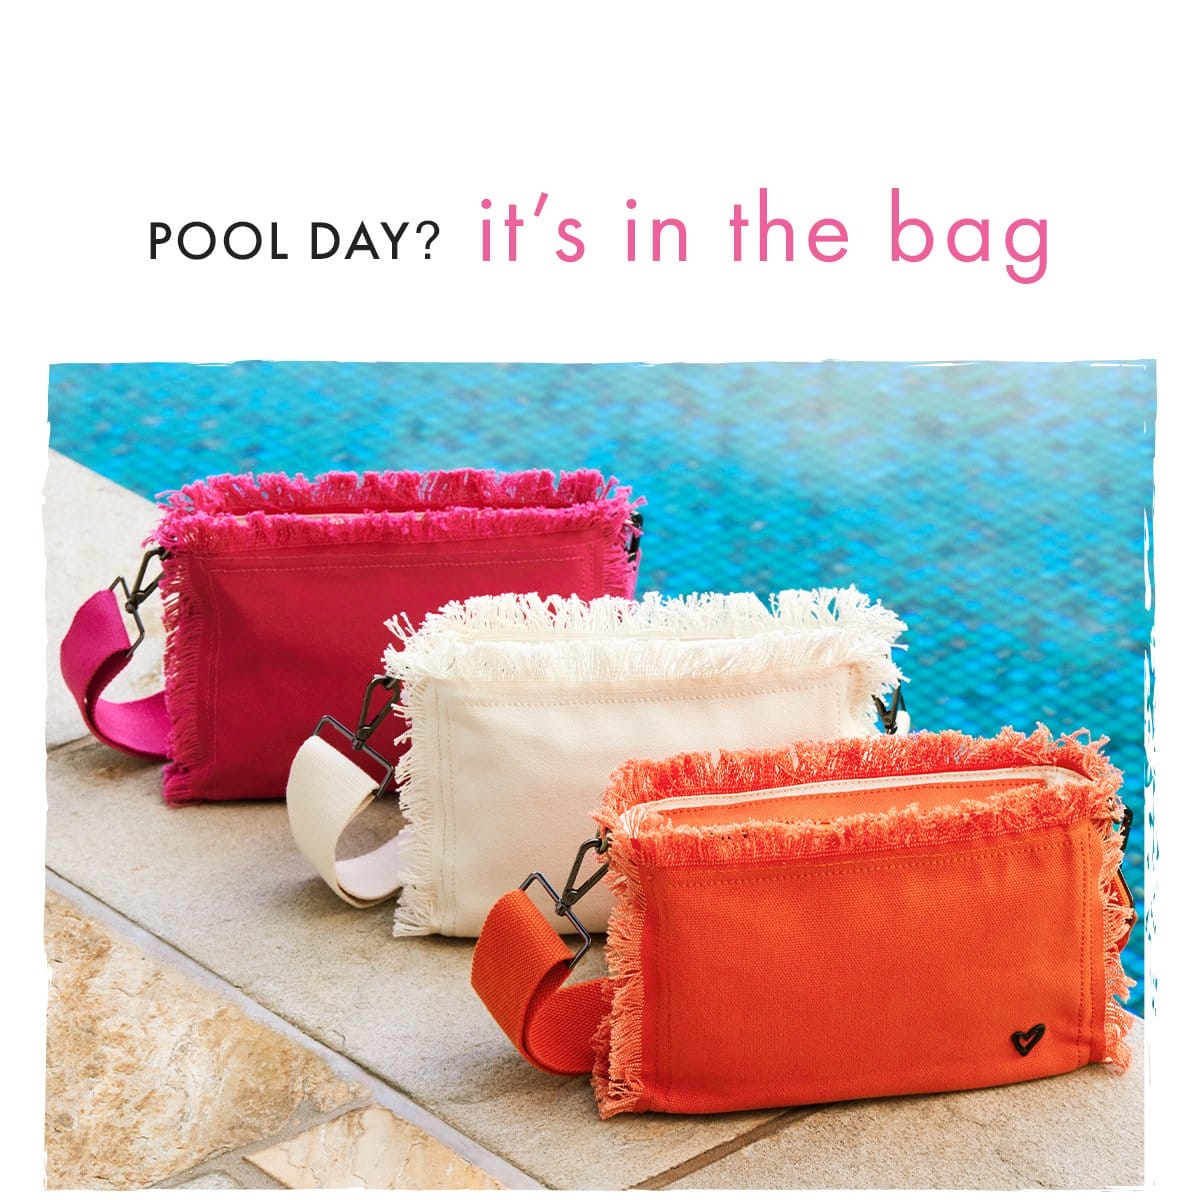 Pool Day? It's in the bag.